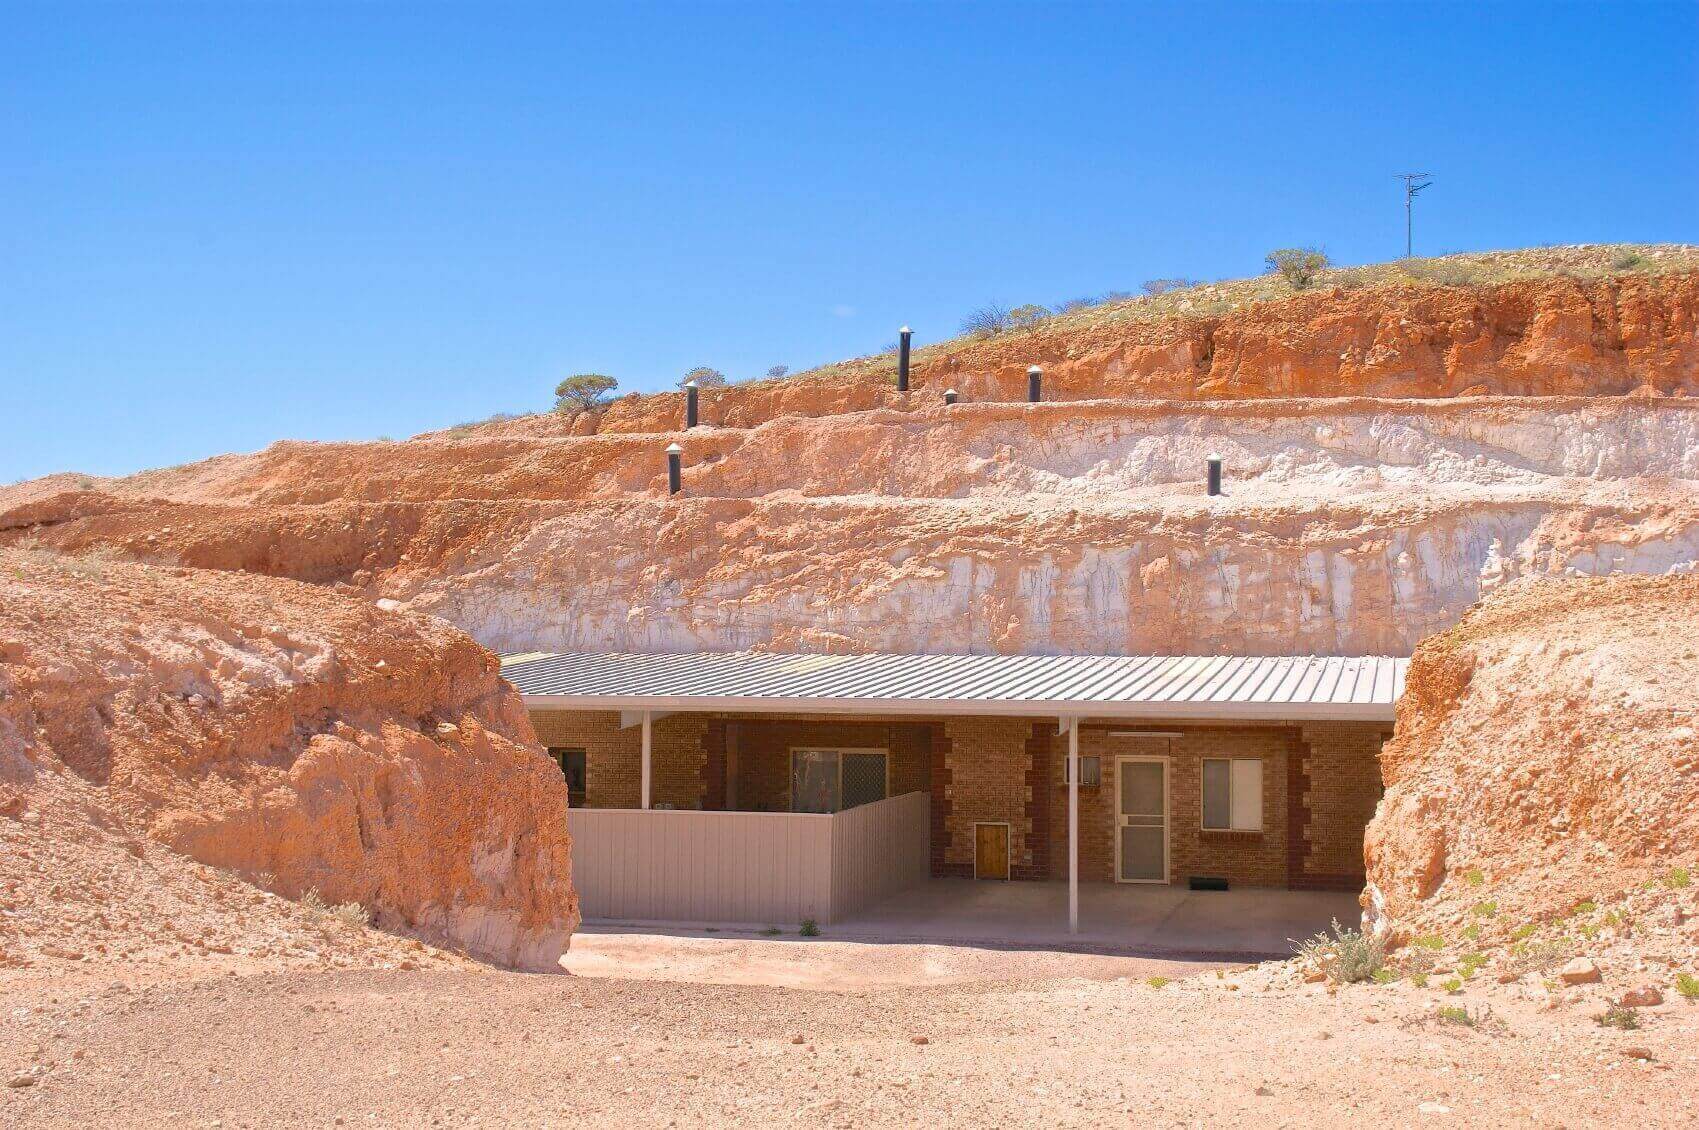 Top Image: Crocodile Harry’s Underground Nest, one of the homes in Coober Pedy.